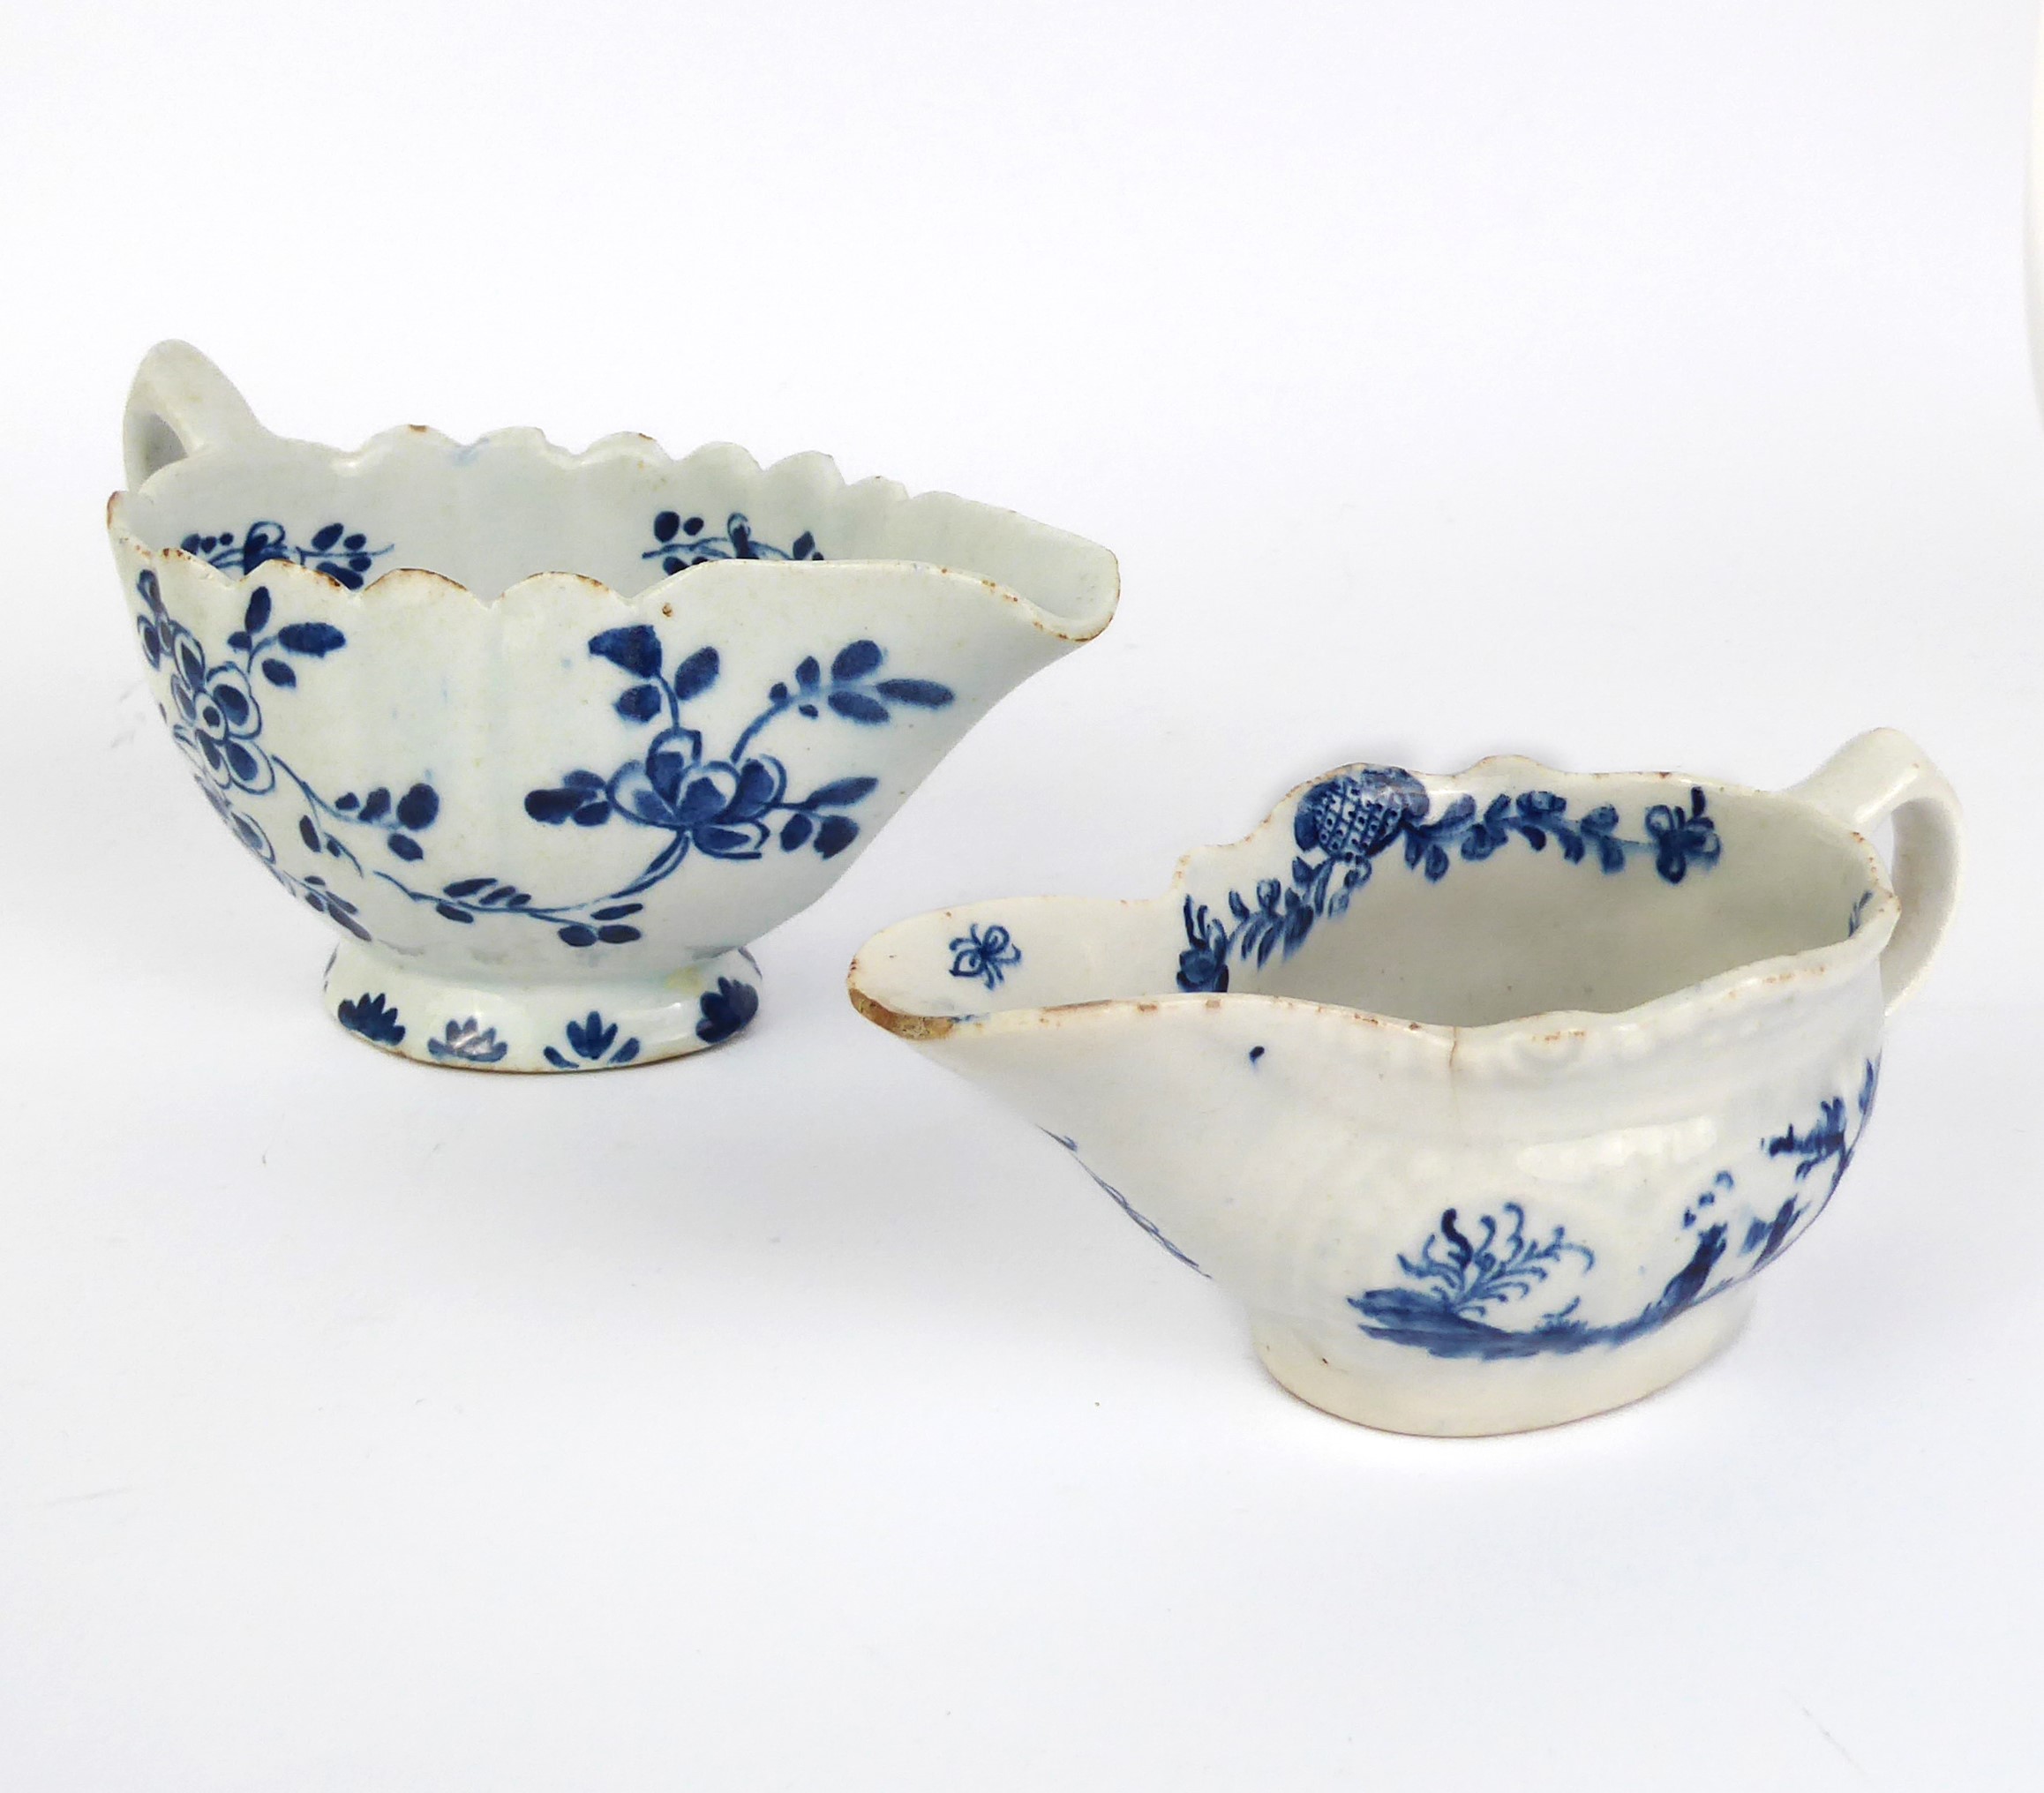 Two early 19th century English porcelain cream jugs - both painted with blue and white decoration, - Image 2 of 9